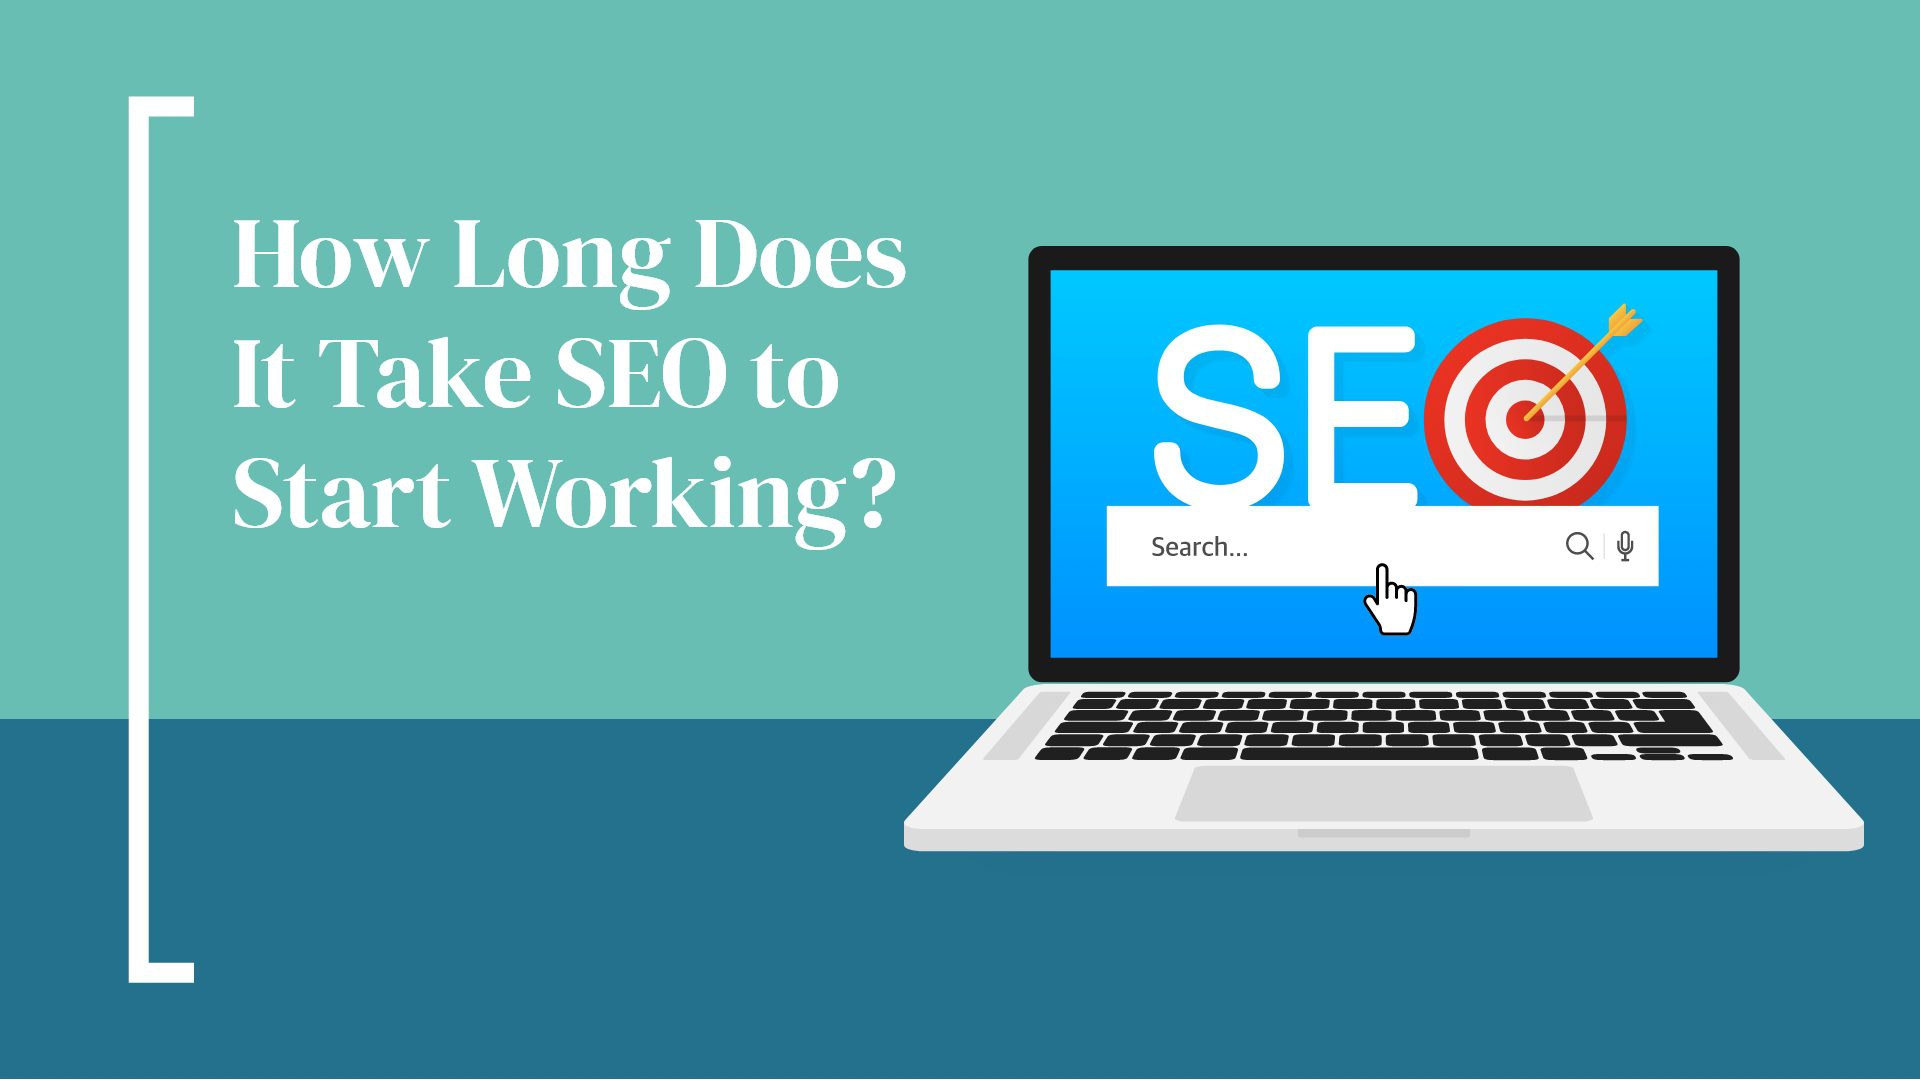 How Long Does It Take For SEO To Start Working?